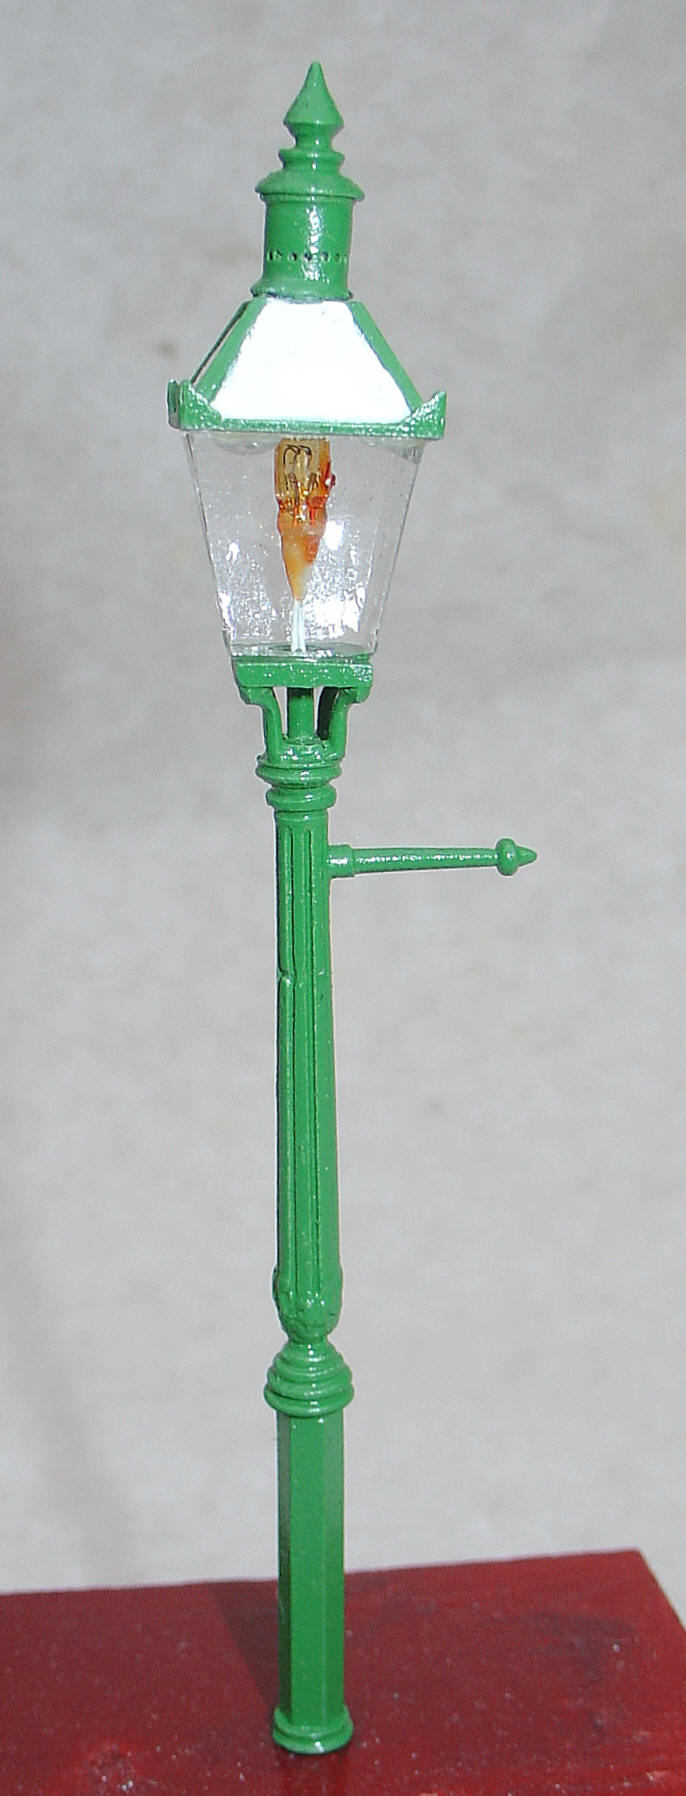 7mm Duncan Models Gas Lamp Kit complete with bulb in O Gauge 